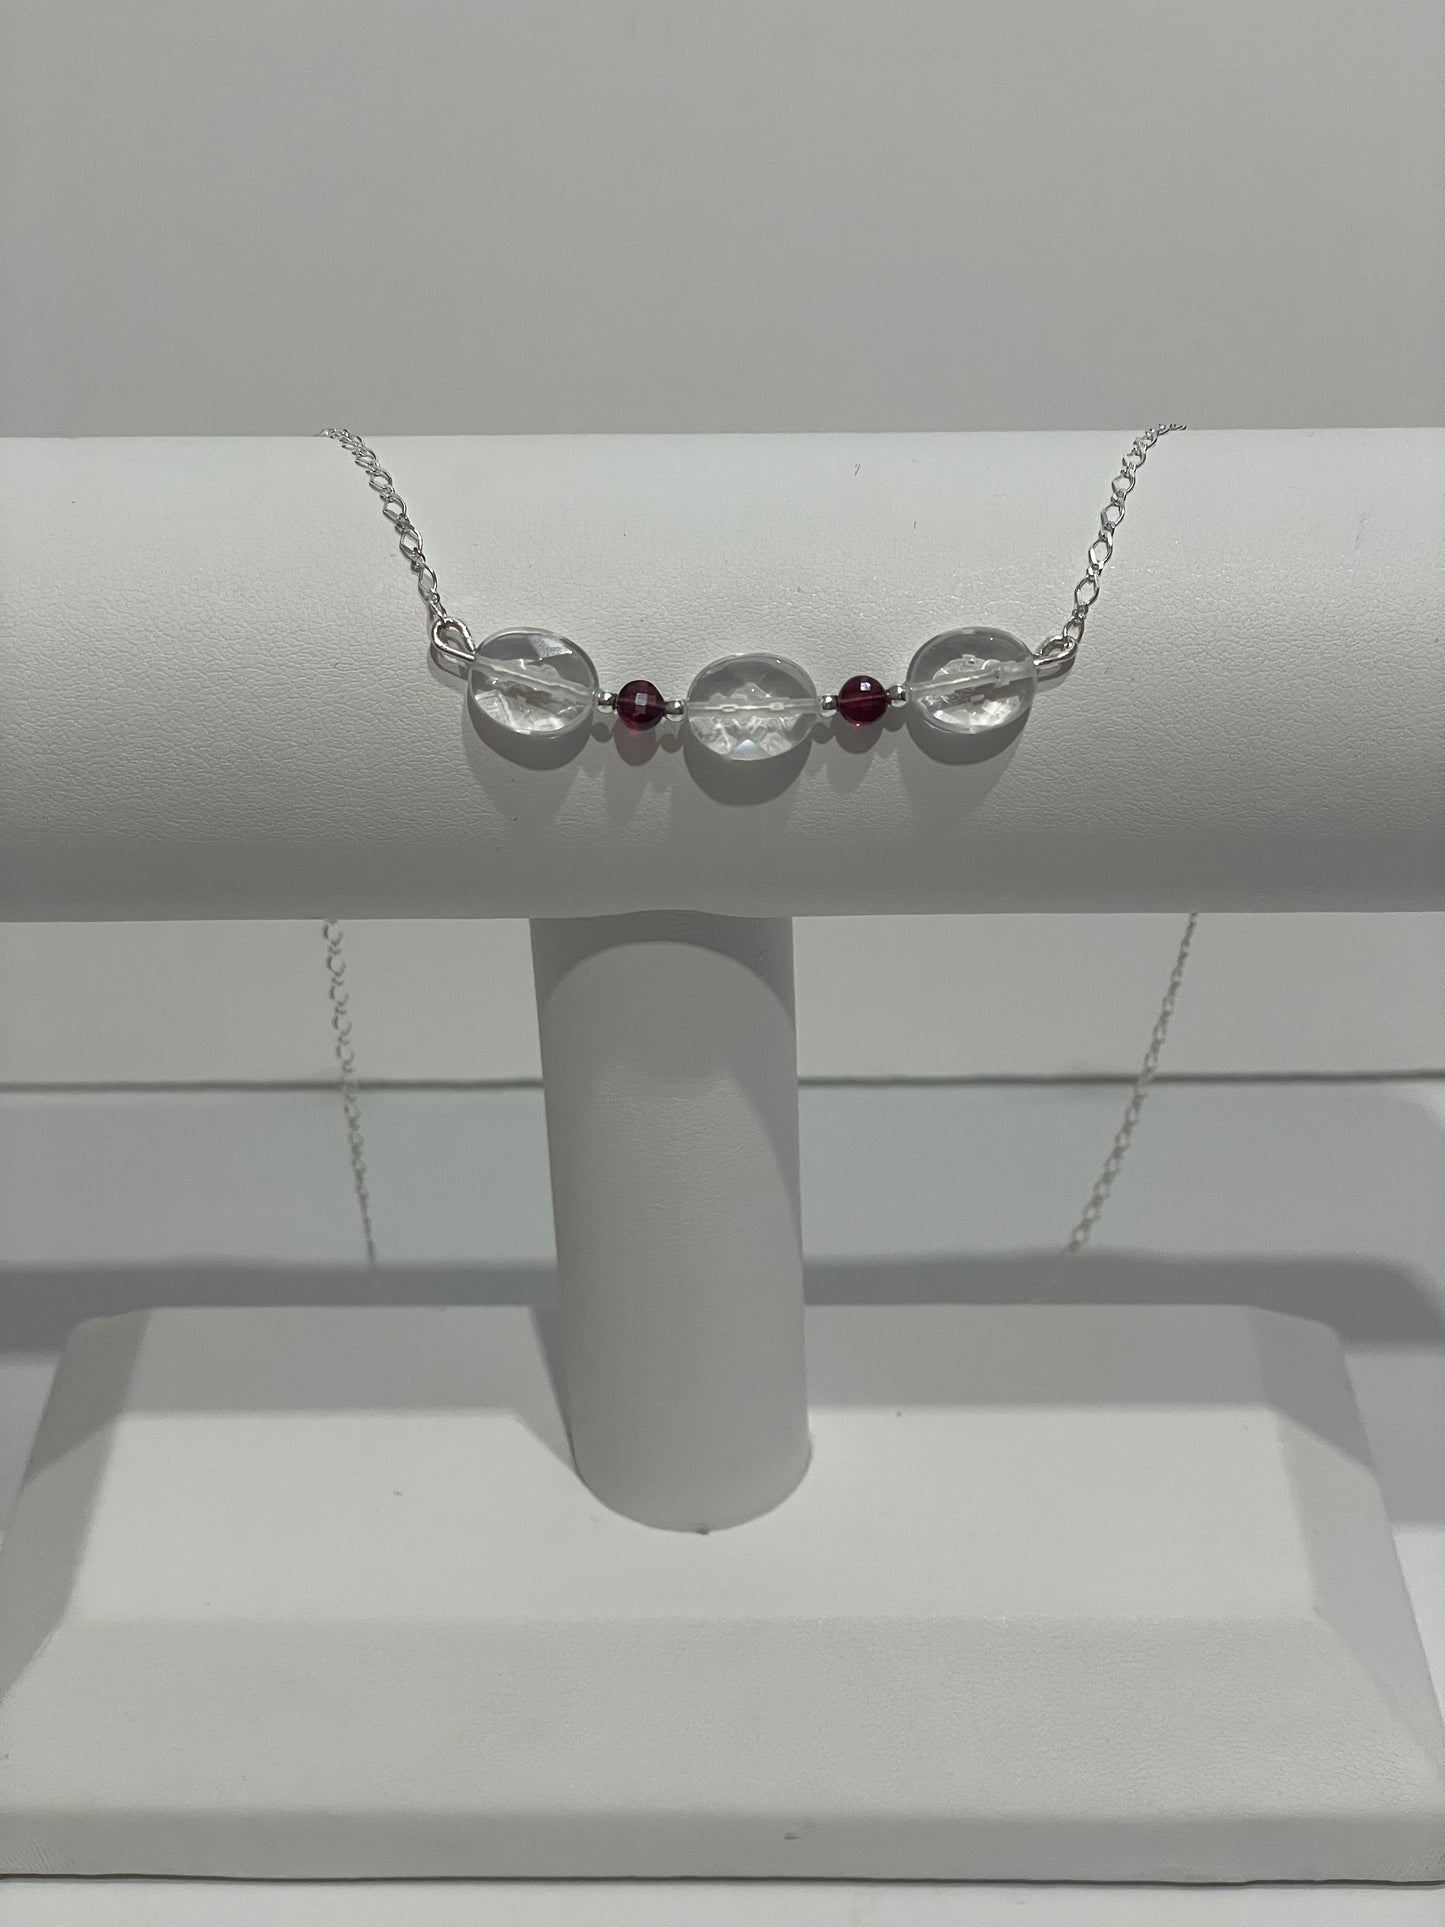 Clear Quartz and Garnet oval necklace